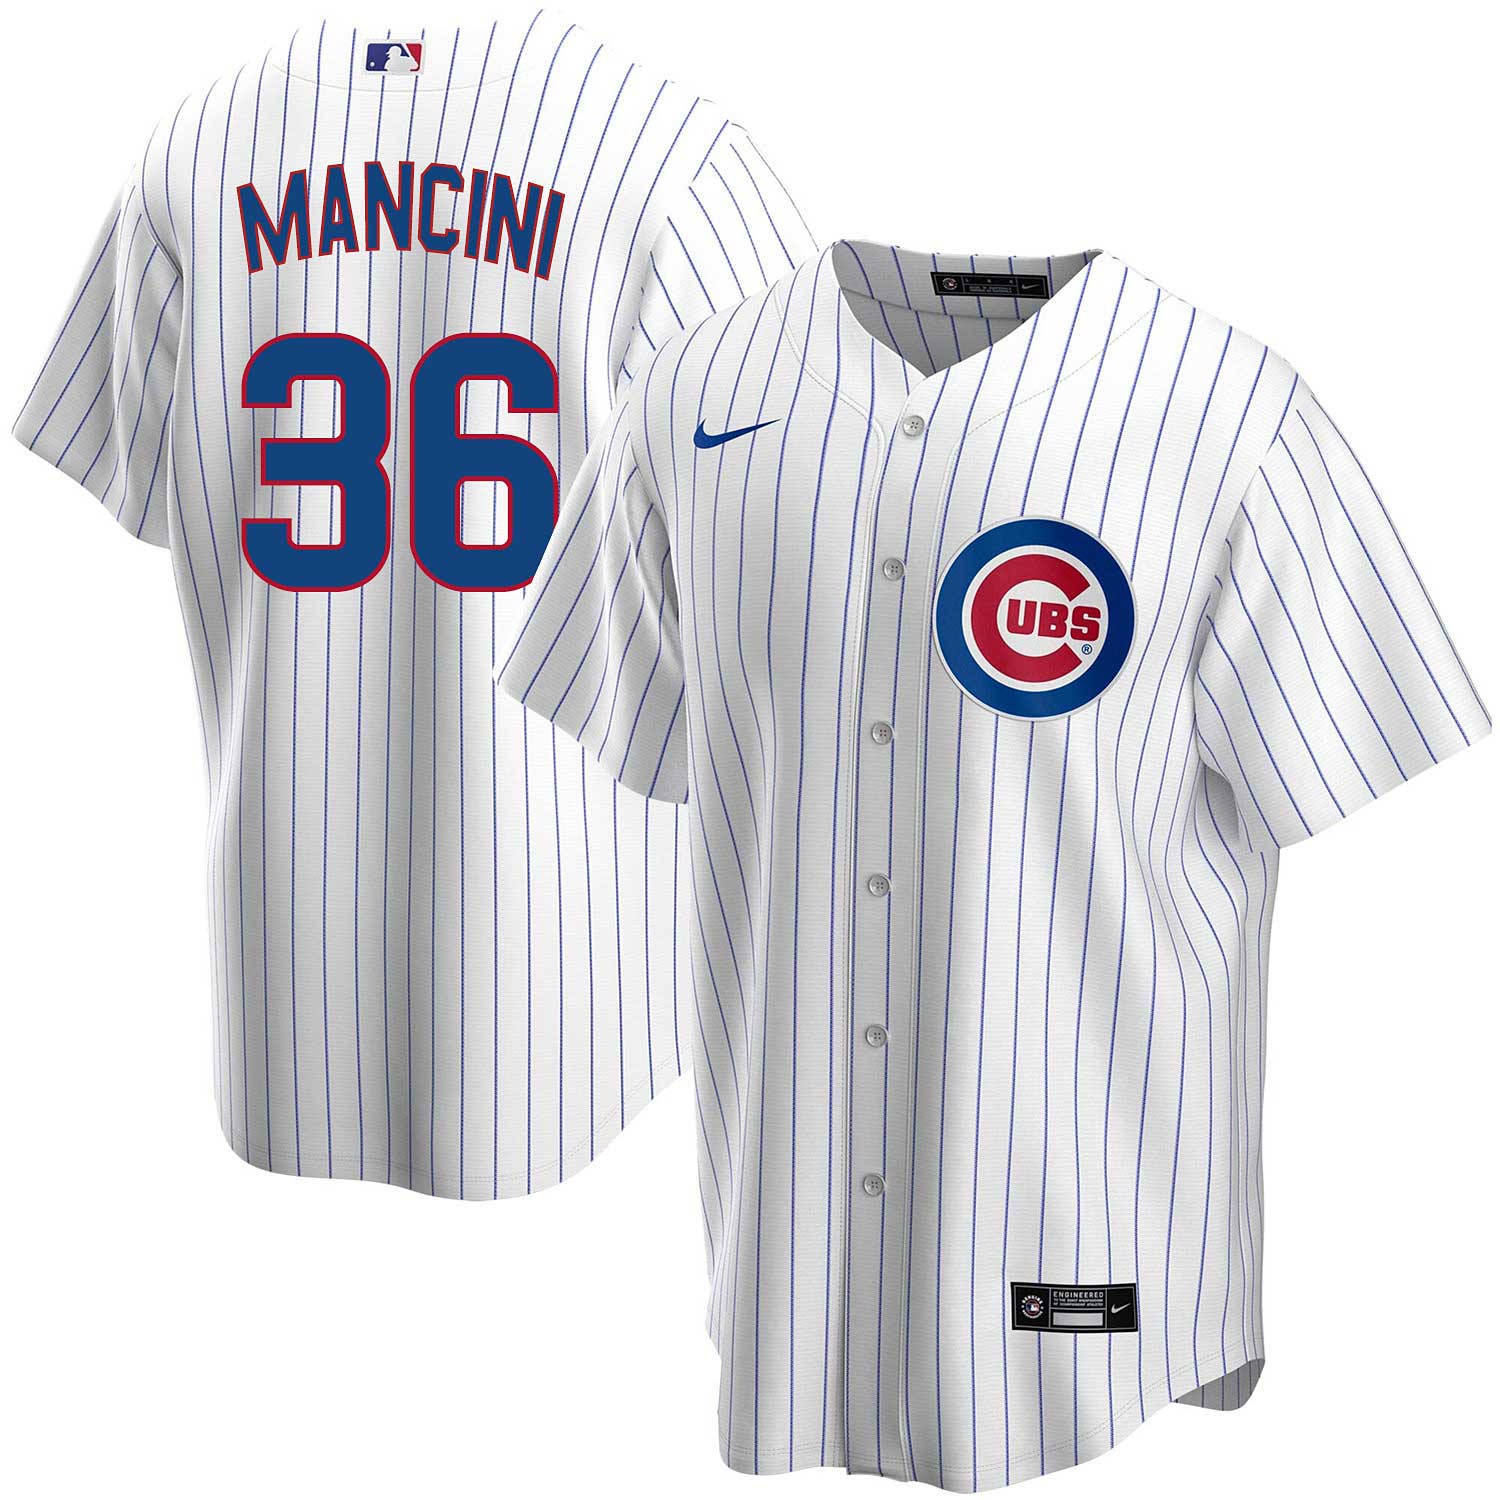 Jersey Trey Mancini Nike Home Replica w/ Authentic Lettering Large